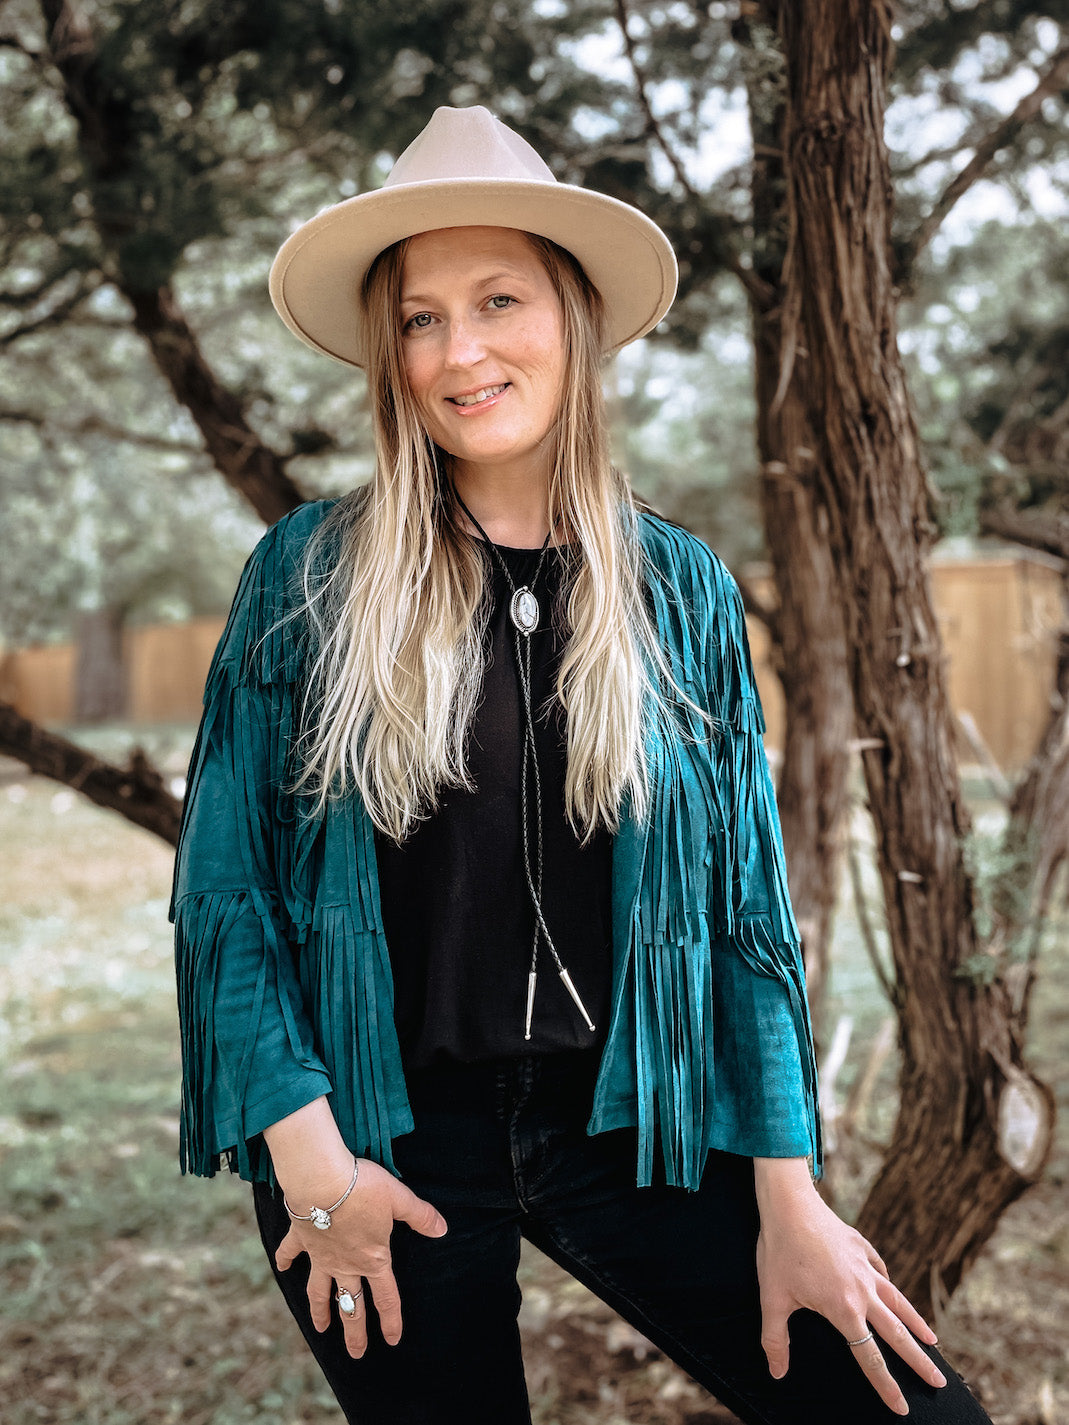 Woman smiling standing outside in front of trees wearing a cream colored cowboy hat, turquoise fringe jacket, black shirt and pants and a white oval Ivory Creek Variscite sterling silver bolo with black leather cord.